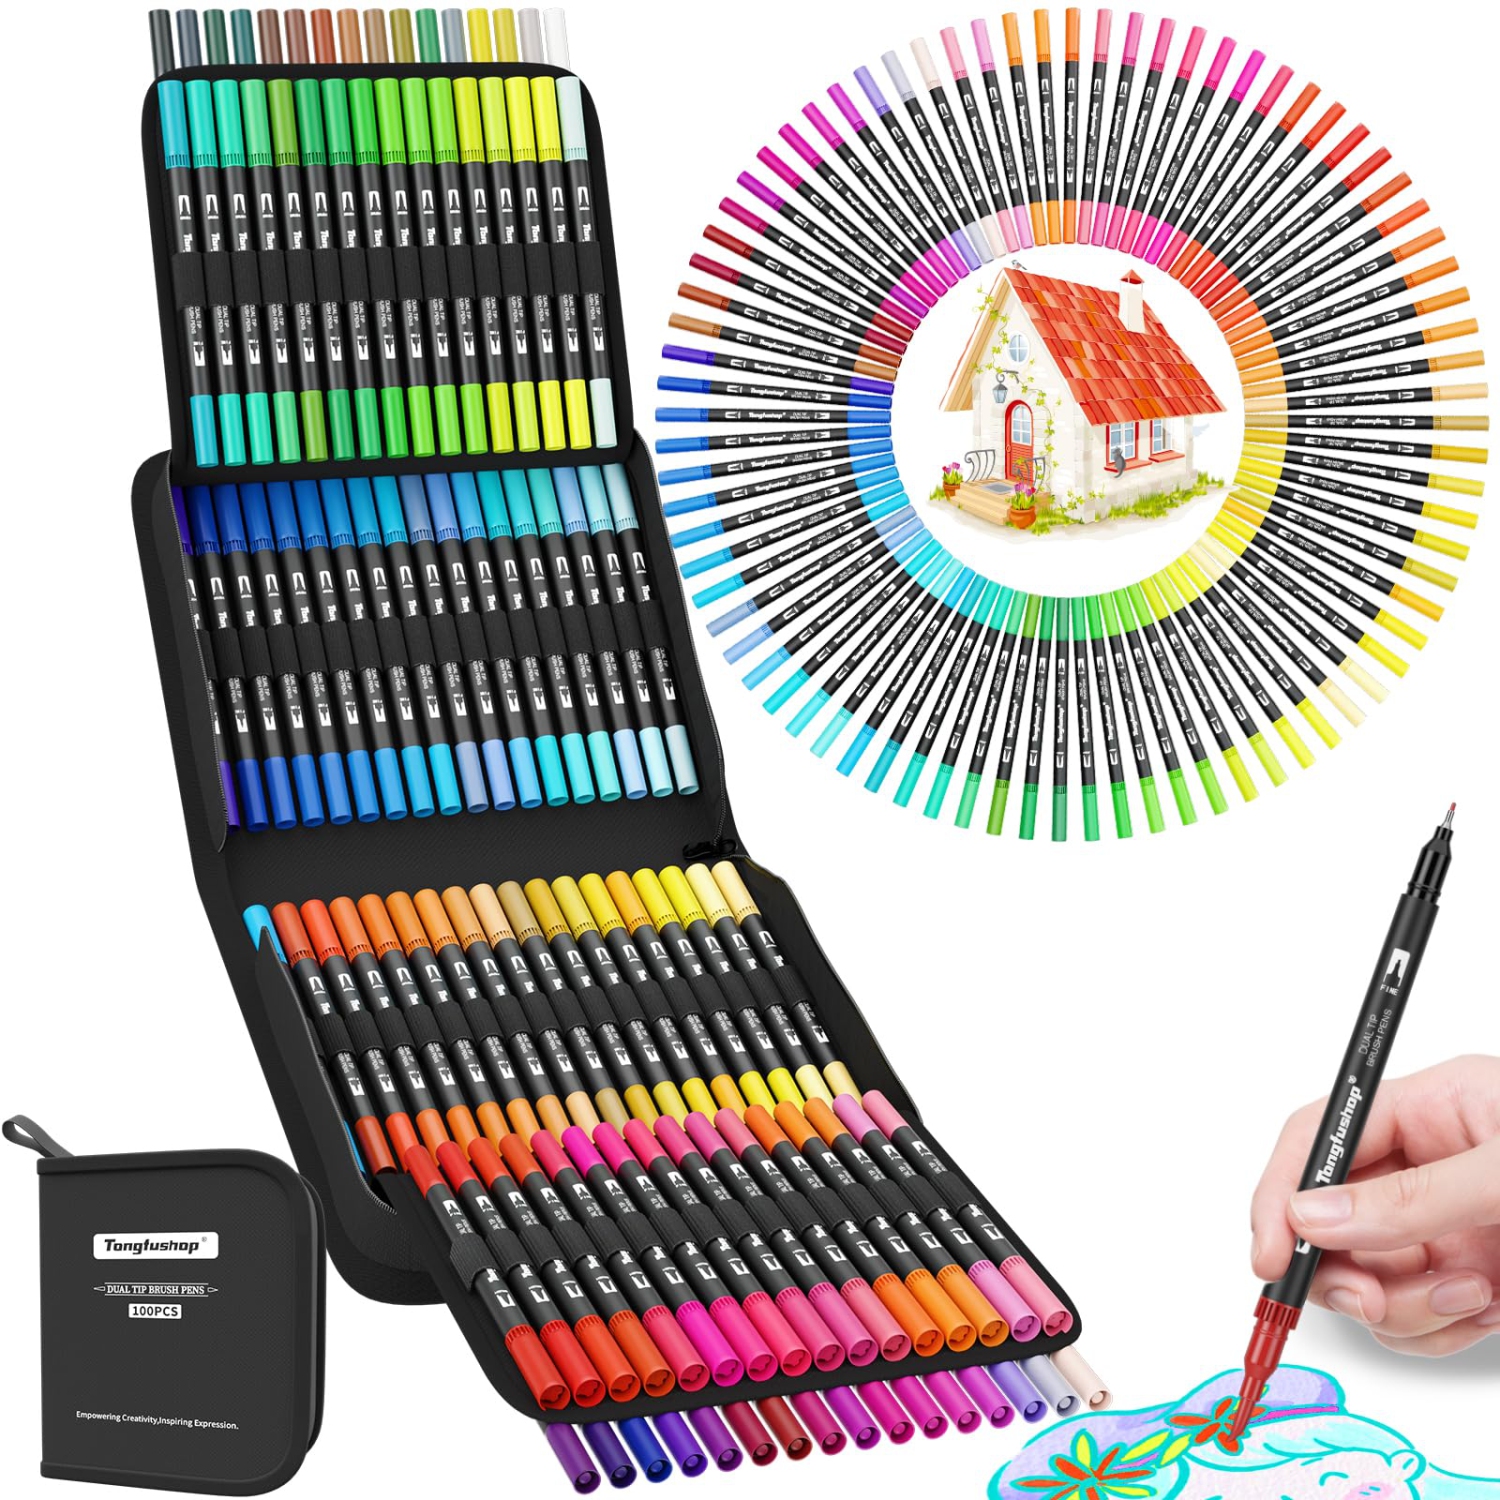 Vibrant Artistry: 100 Color Dual Tip Brush Markers for Creative Expression in Adult Coloring Books, Journaling, Note Taking, Lettering, and Calligraphy